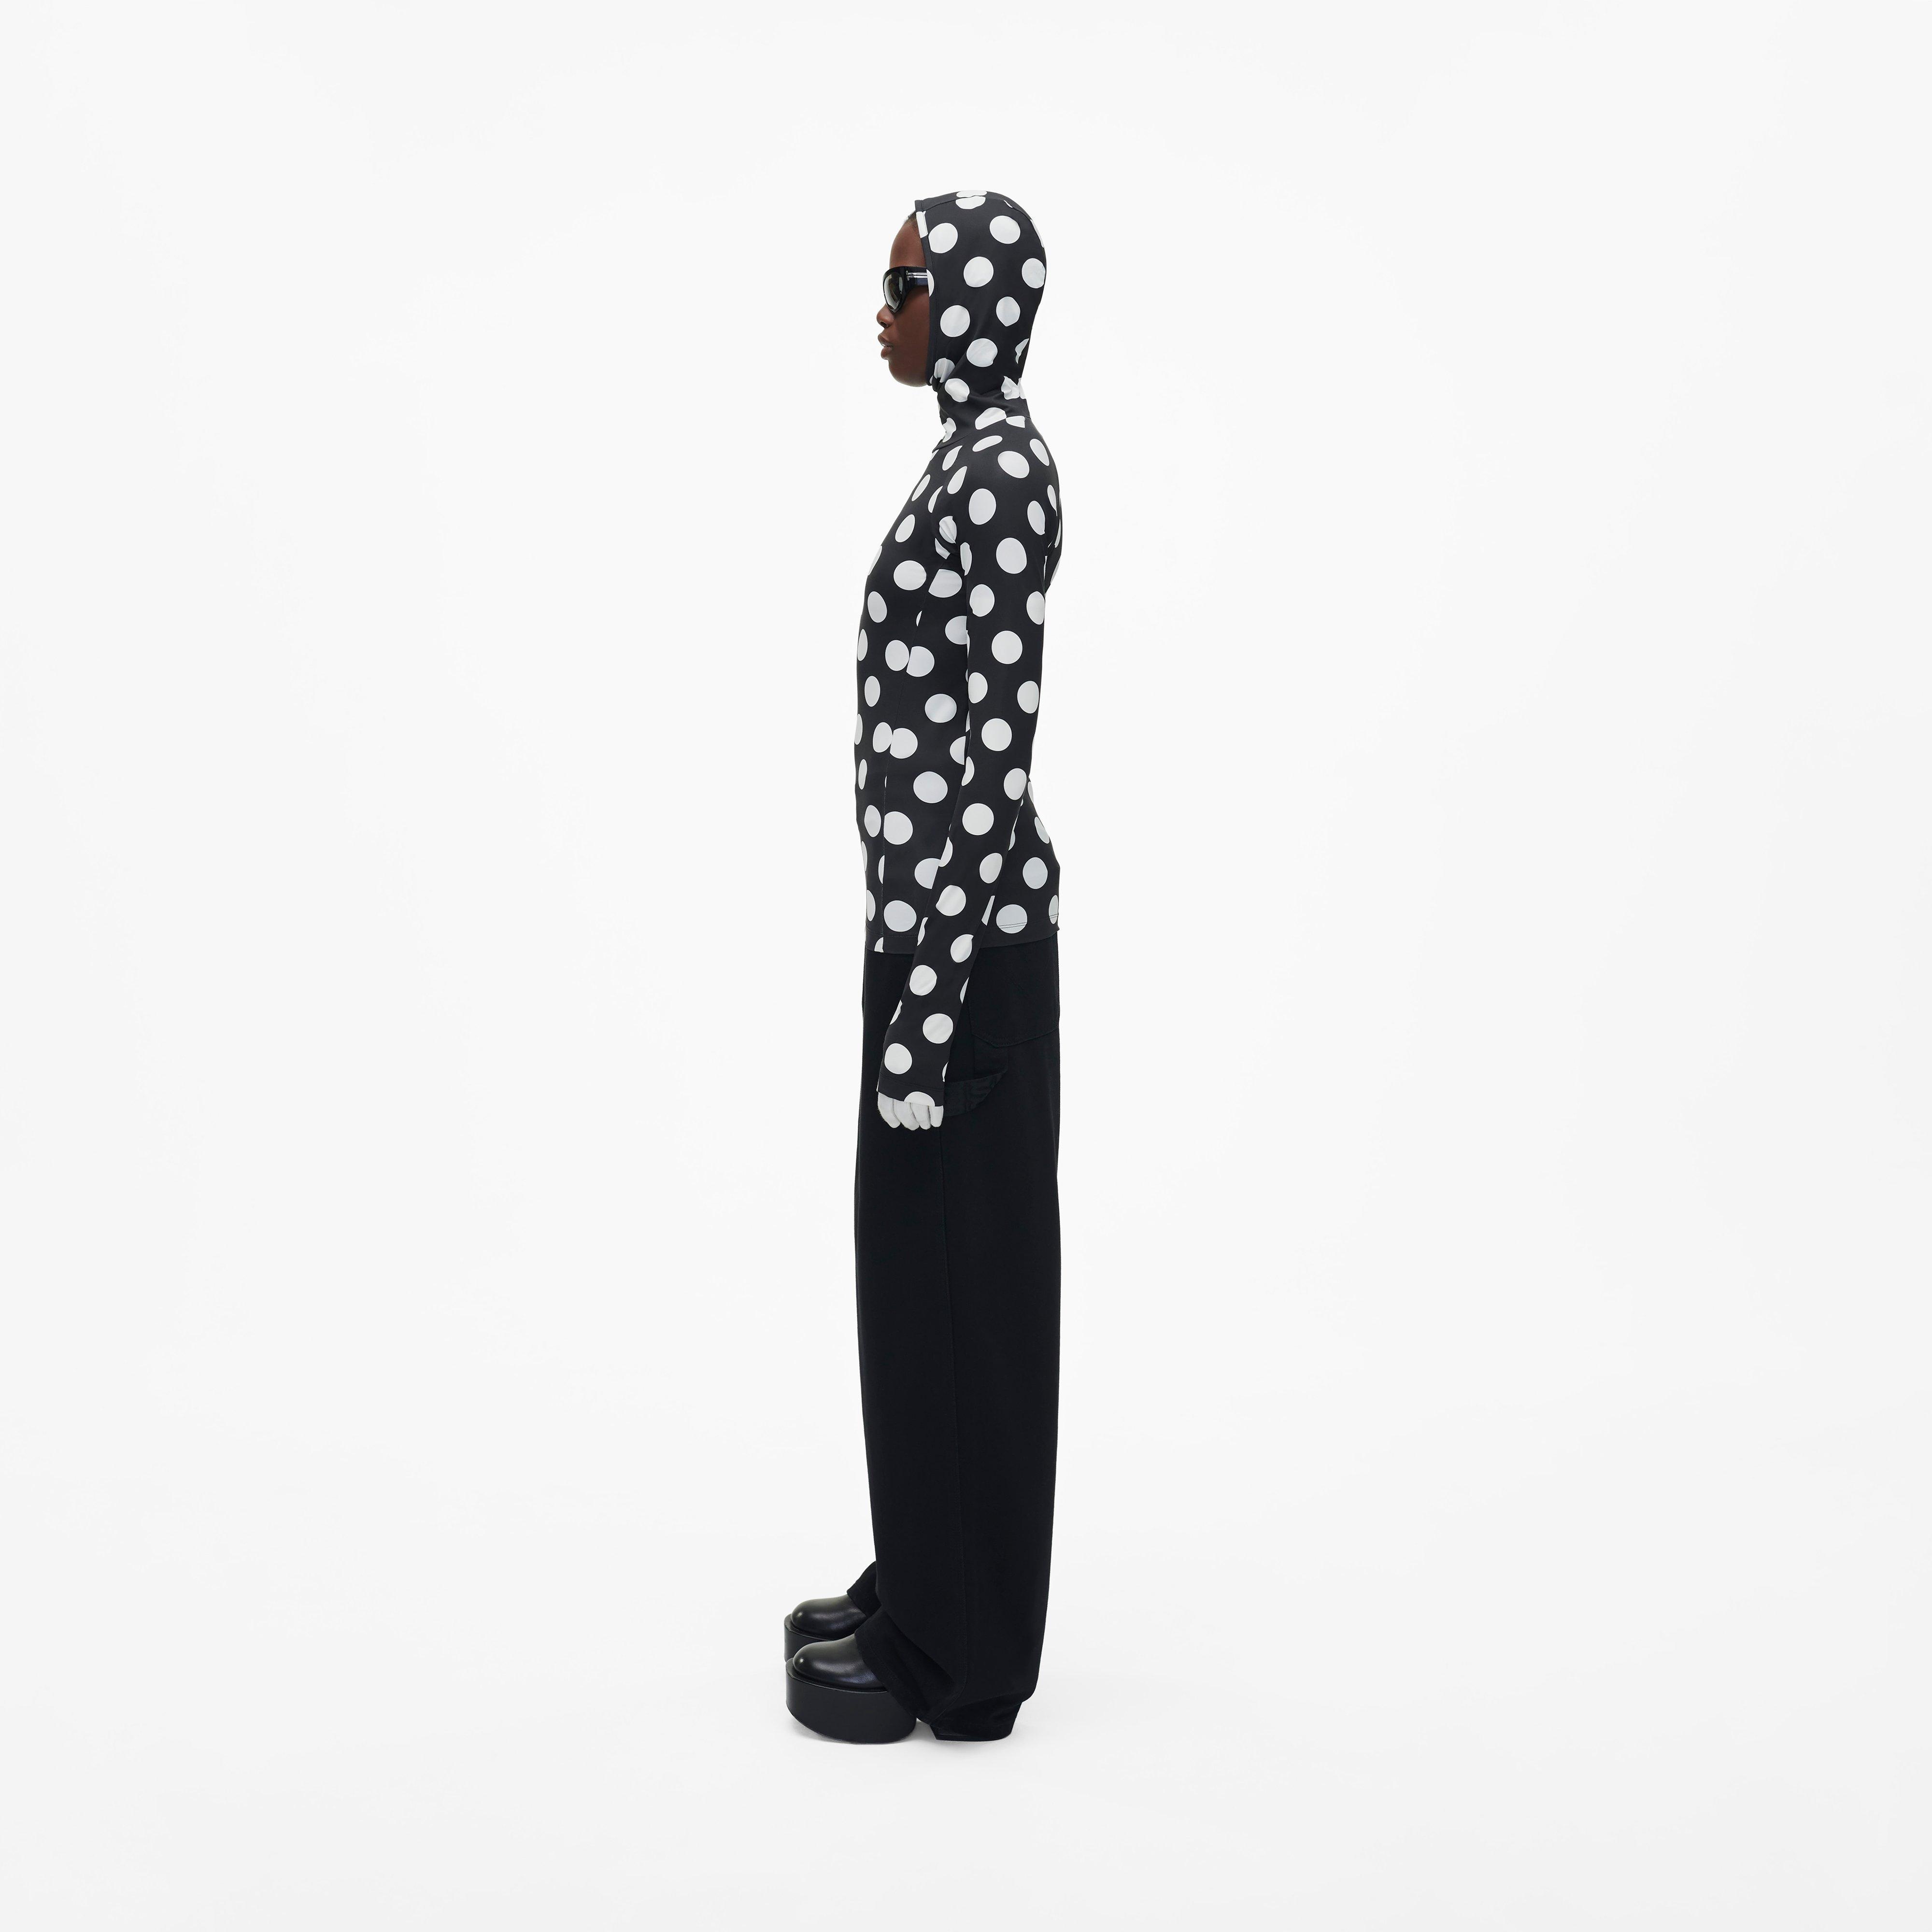 THE SPOTS HOODED LONG SLEEVE - 3